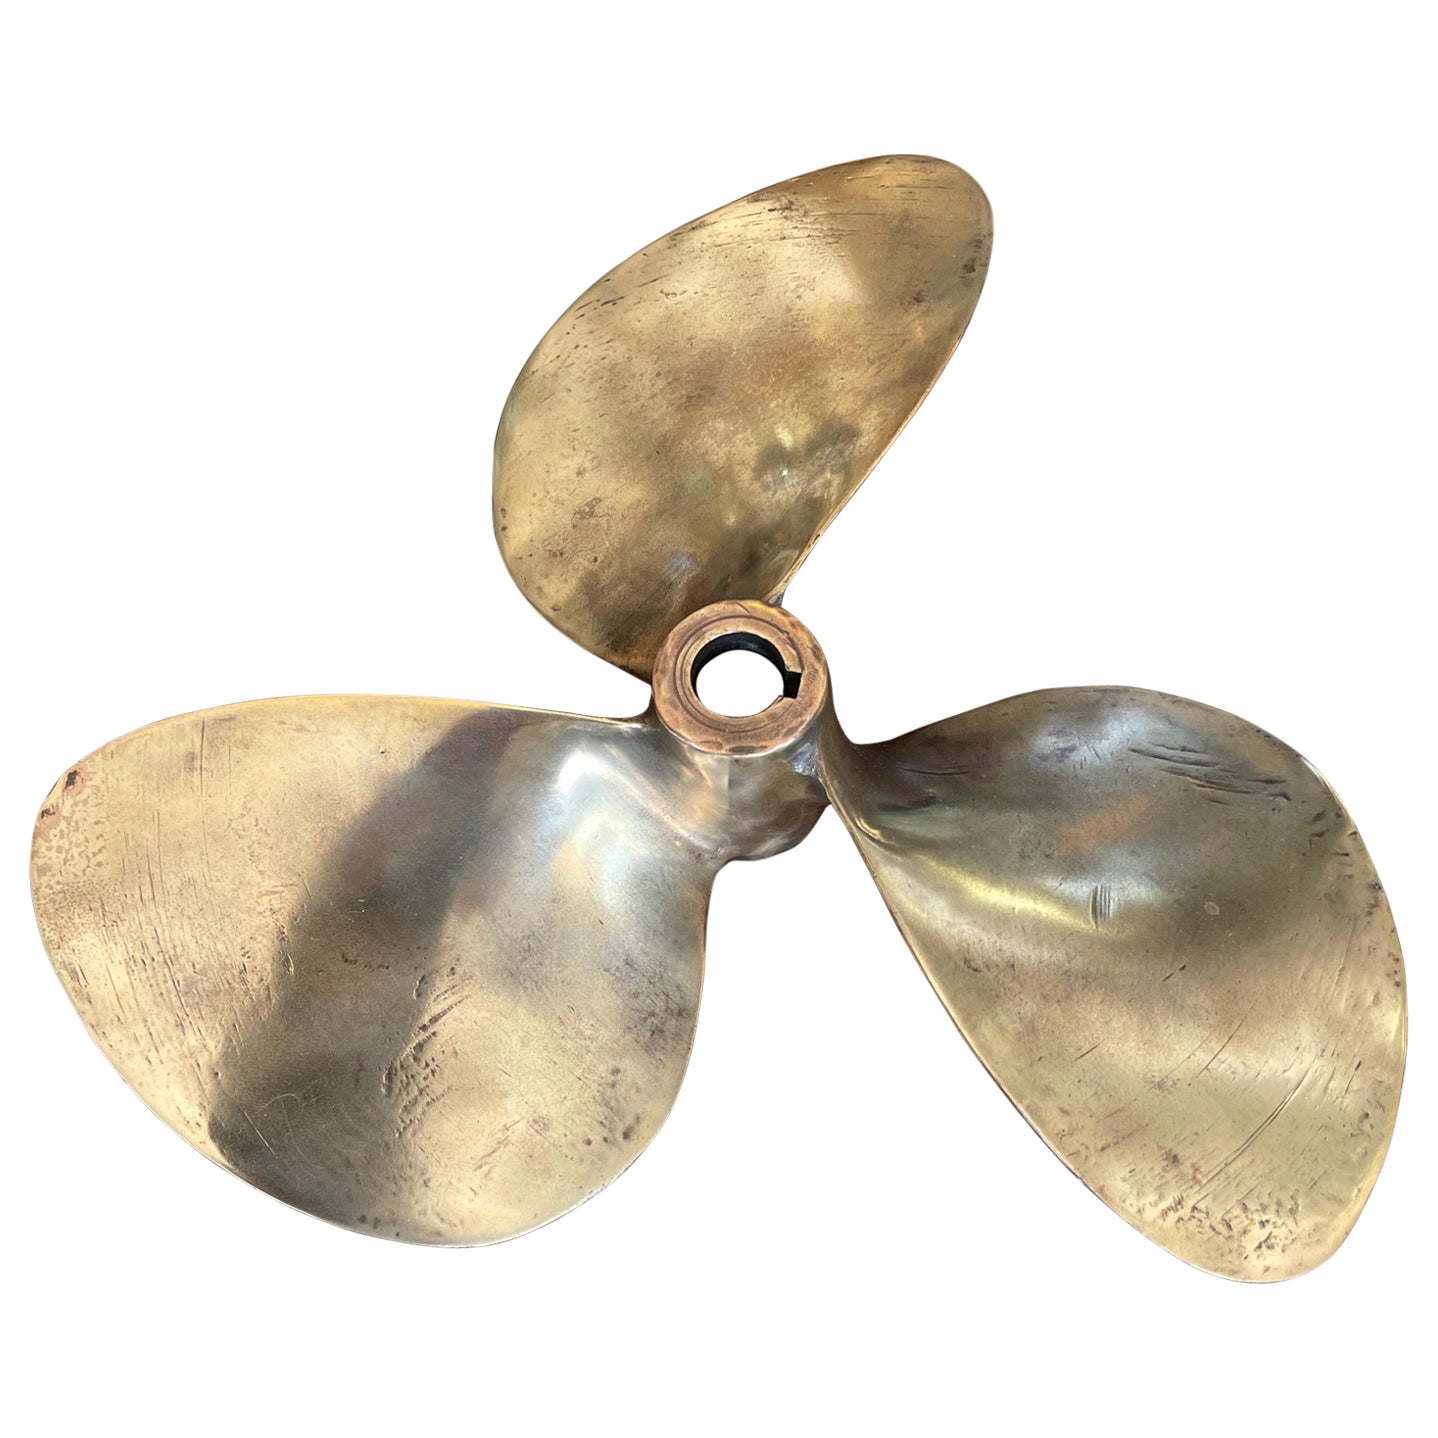 Vintage Solid Brass Propeller Paper Weight / Desk Accessory For Sale